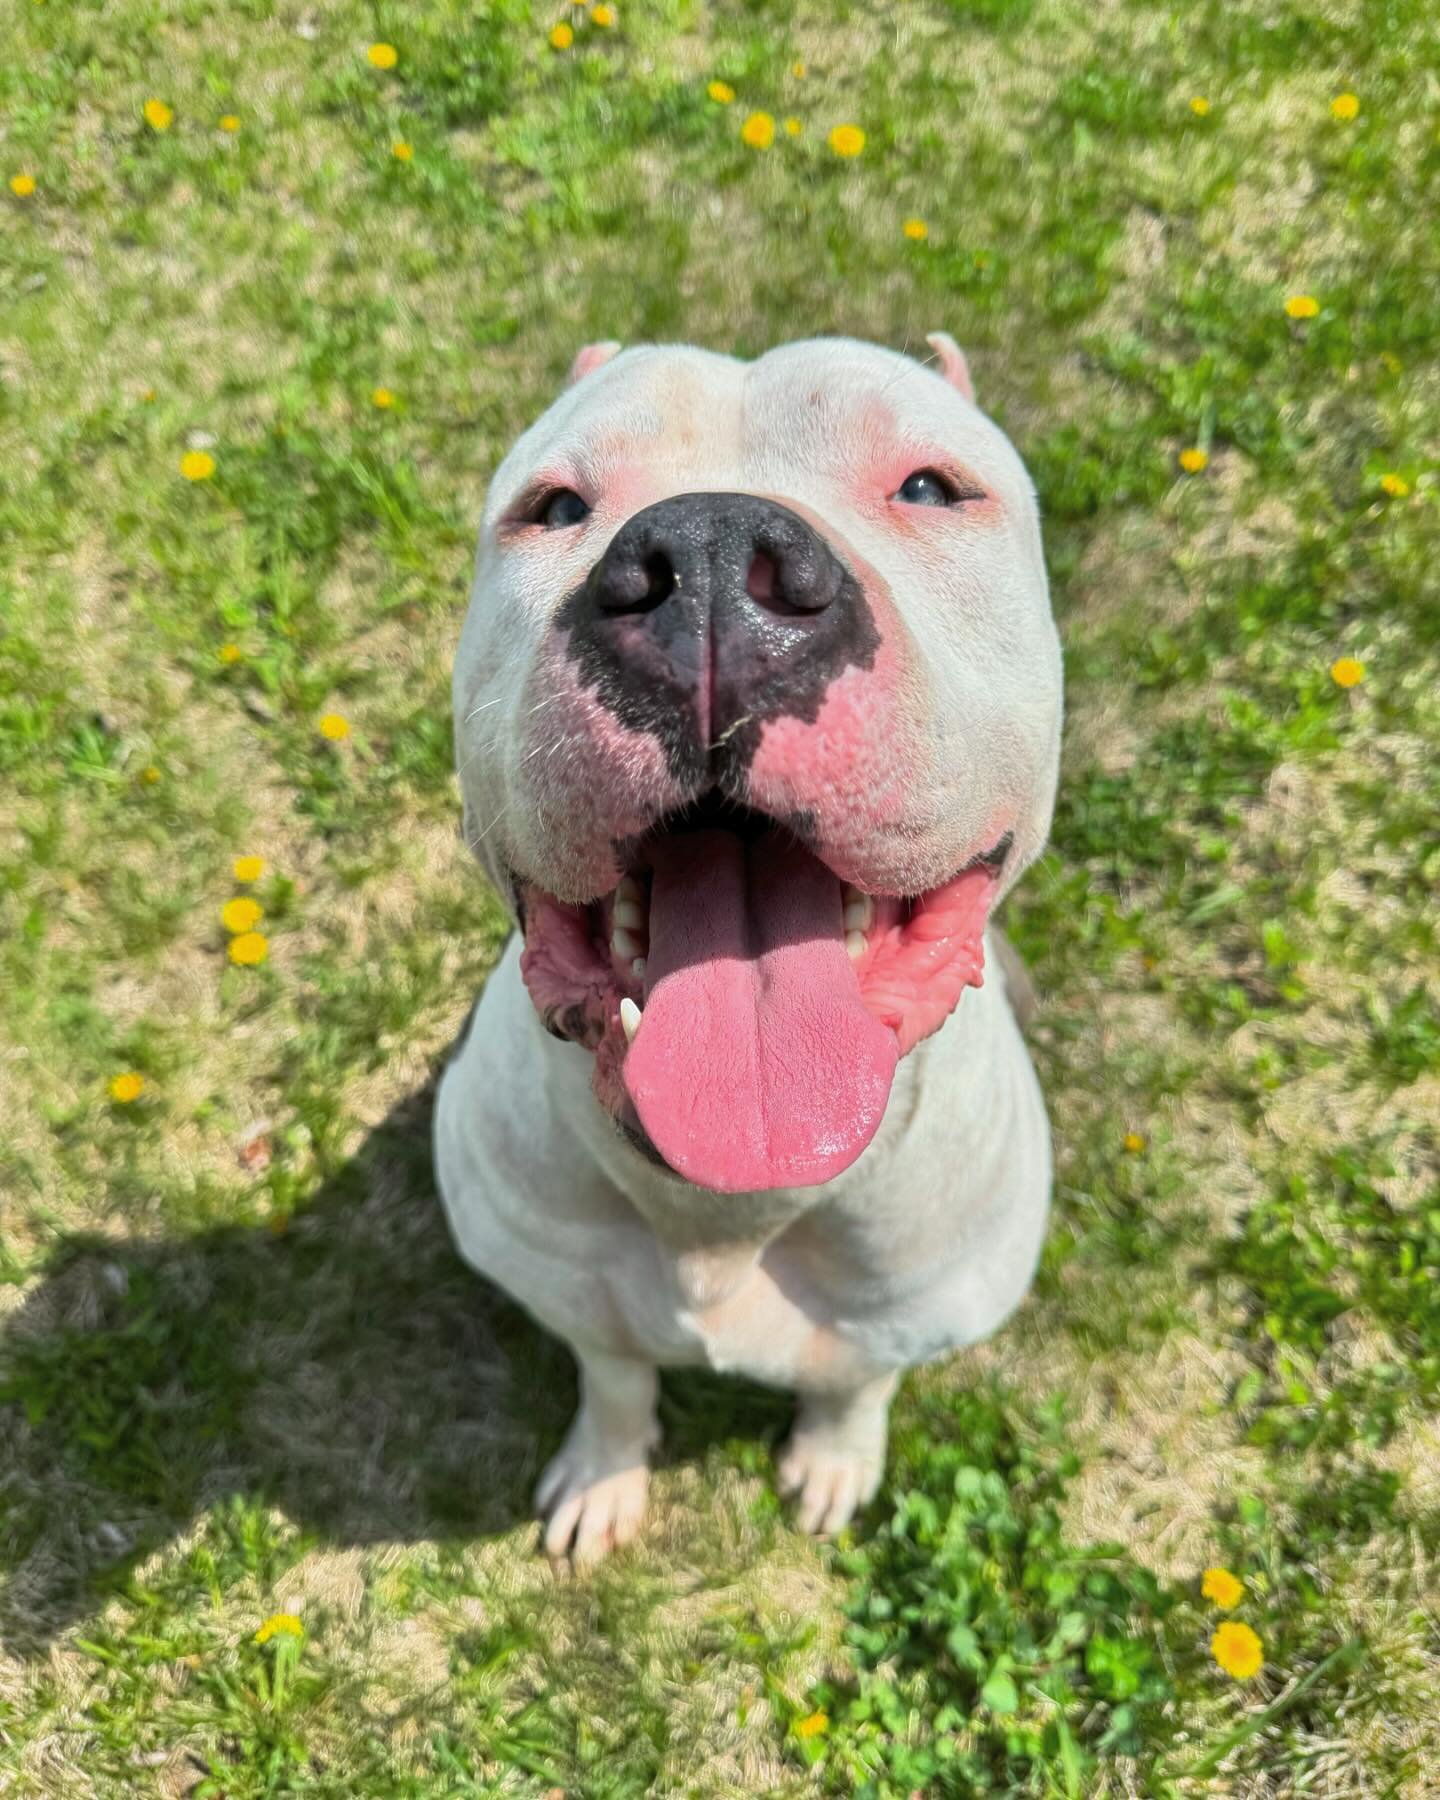 Adoptable Arlo is the happiest boy with a smile that&rsquo;s sure to brighten anyone&rsquo;s day! 🤩 

Interested in making this sweet boy a part of your family?! Click the &ldquo;Adoptables&rdquo; link in our bio to learn more about handsome Arlo! ?